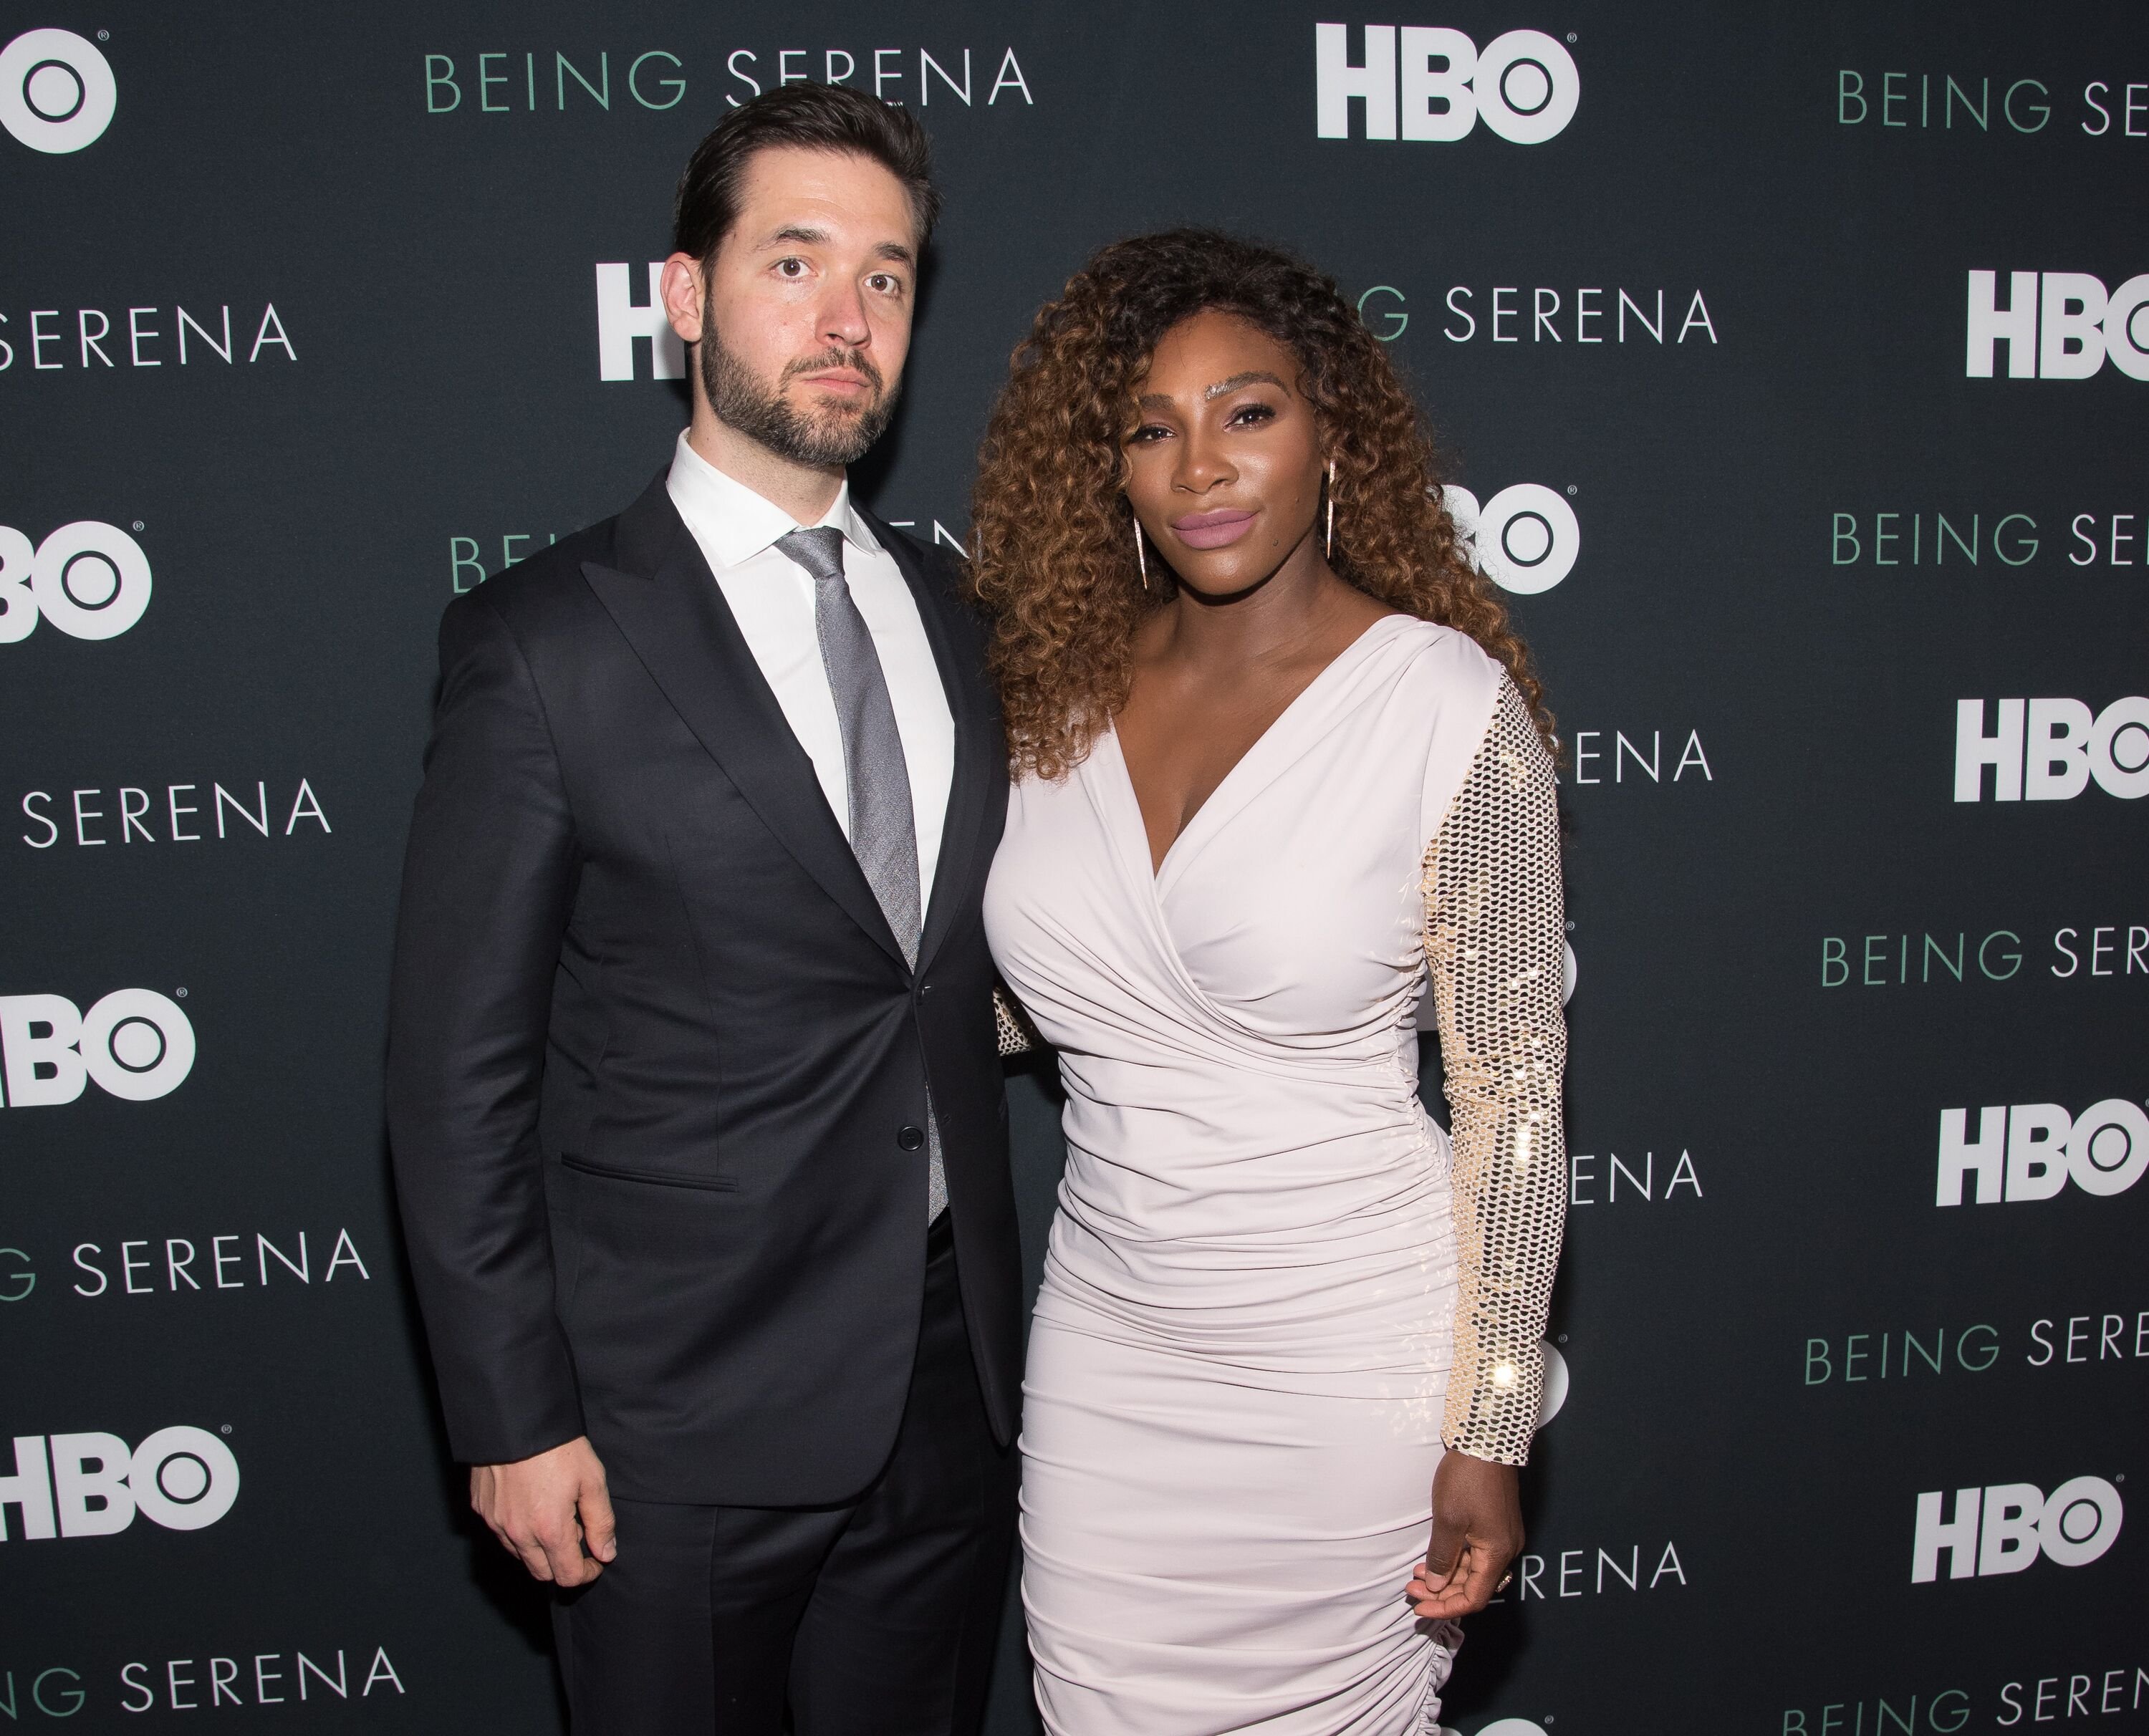 Serena Williams and husband Alexis Ohanian attend the "Being Serena" New York Premiere at Time Warner Center on April 25, 2018 | Photo: Getty Images